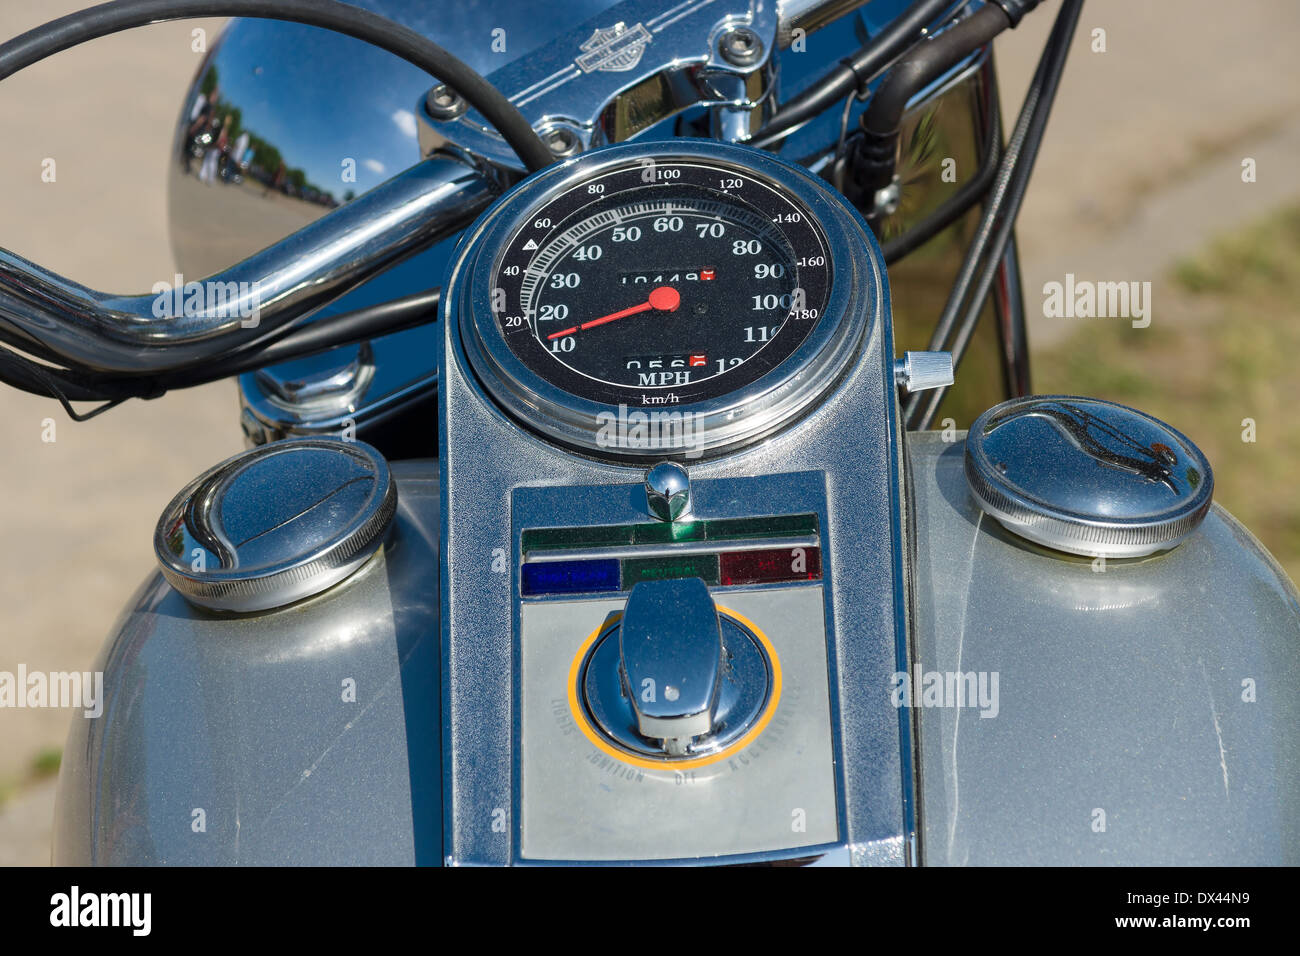 he dashboard and fuel tank motorcycle Harley Davidson Stock Photo